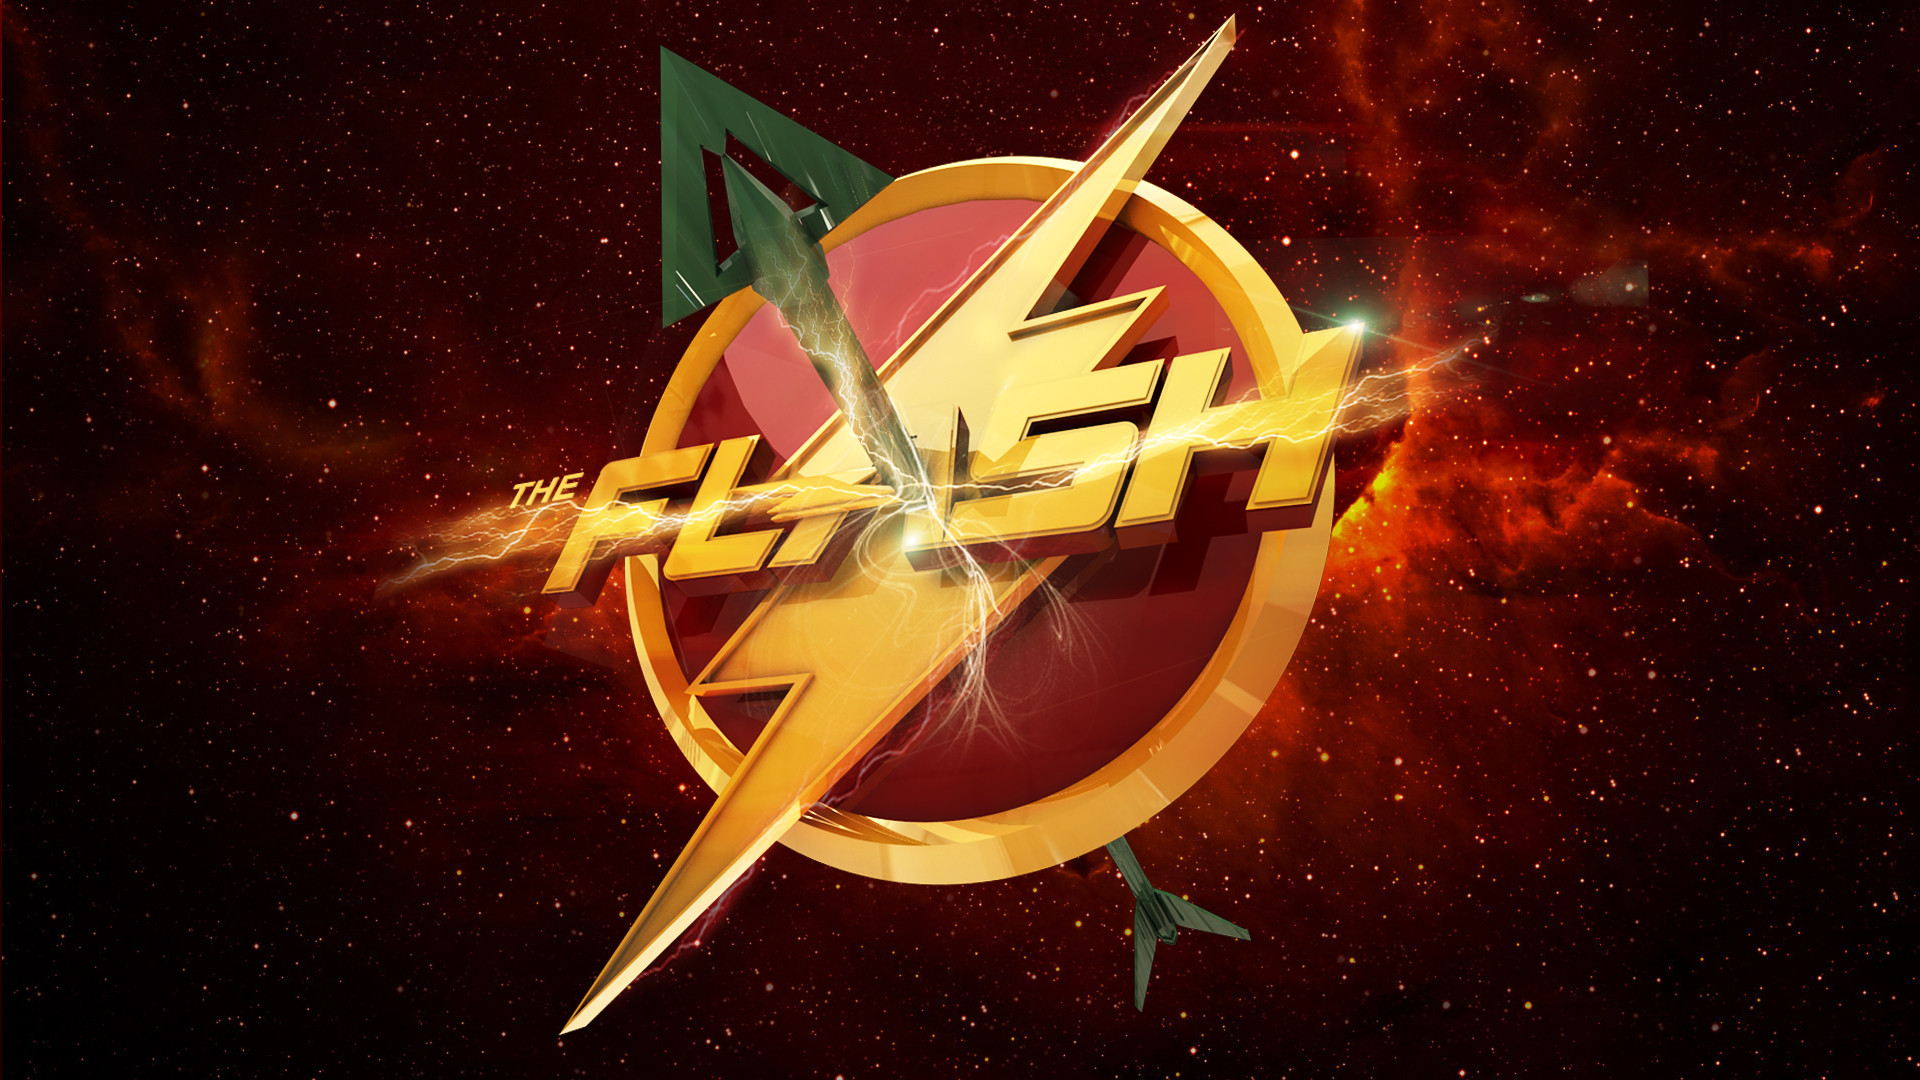 FULL HD / / The Flash Wallpapers and Desktop Backgrounds